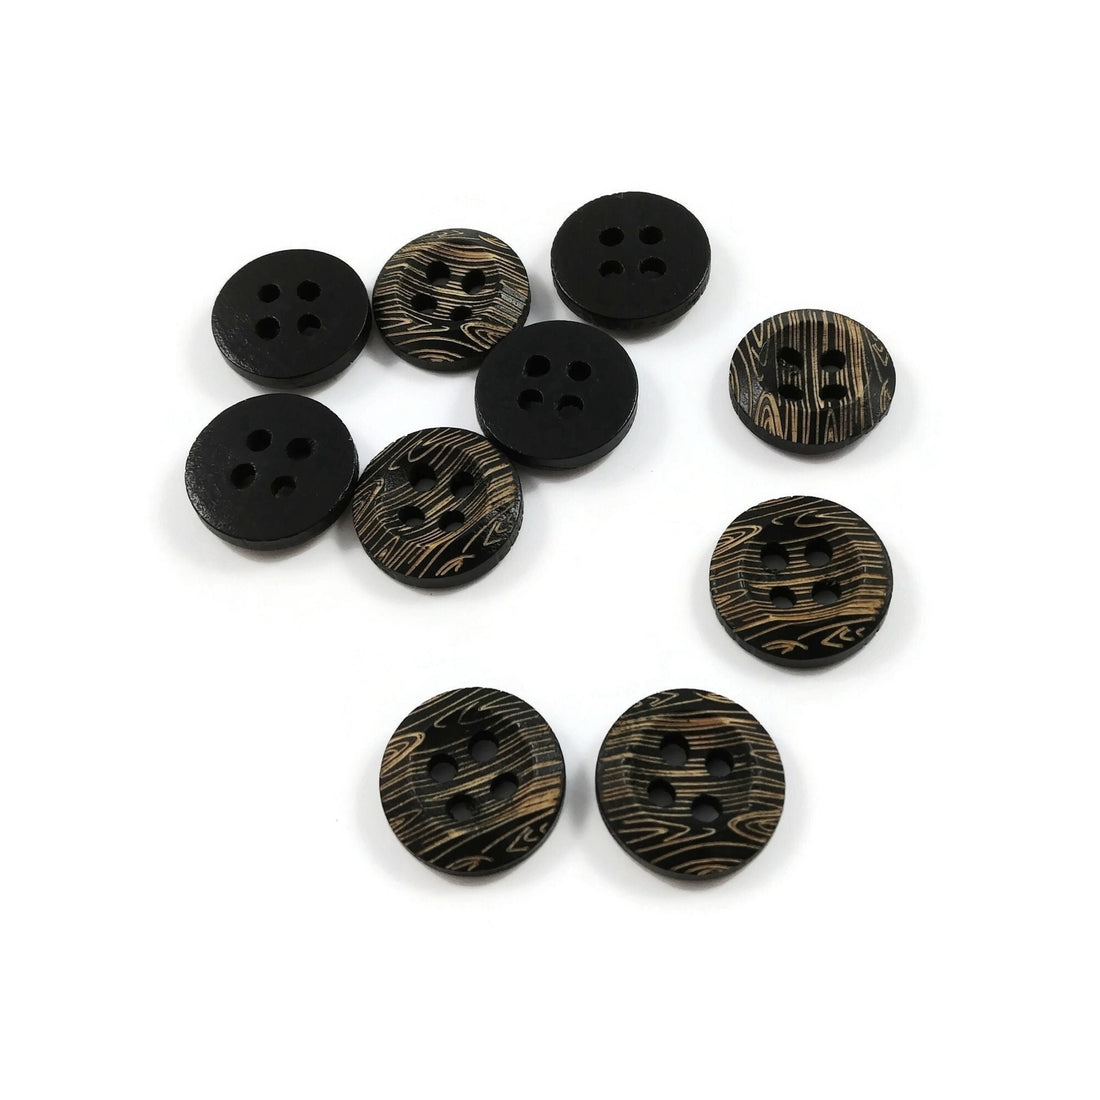 13mm dark wooden buttons, 4 holes shirt sewing buttons, 10 small buttons for knitting